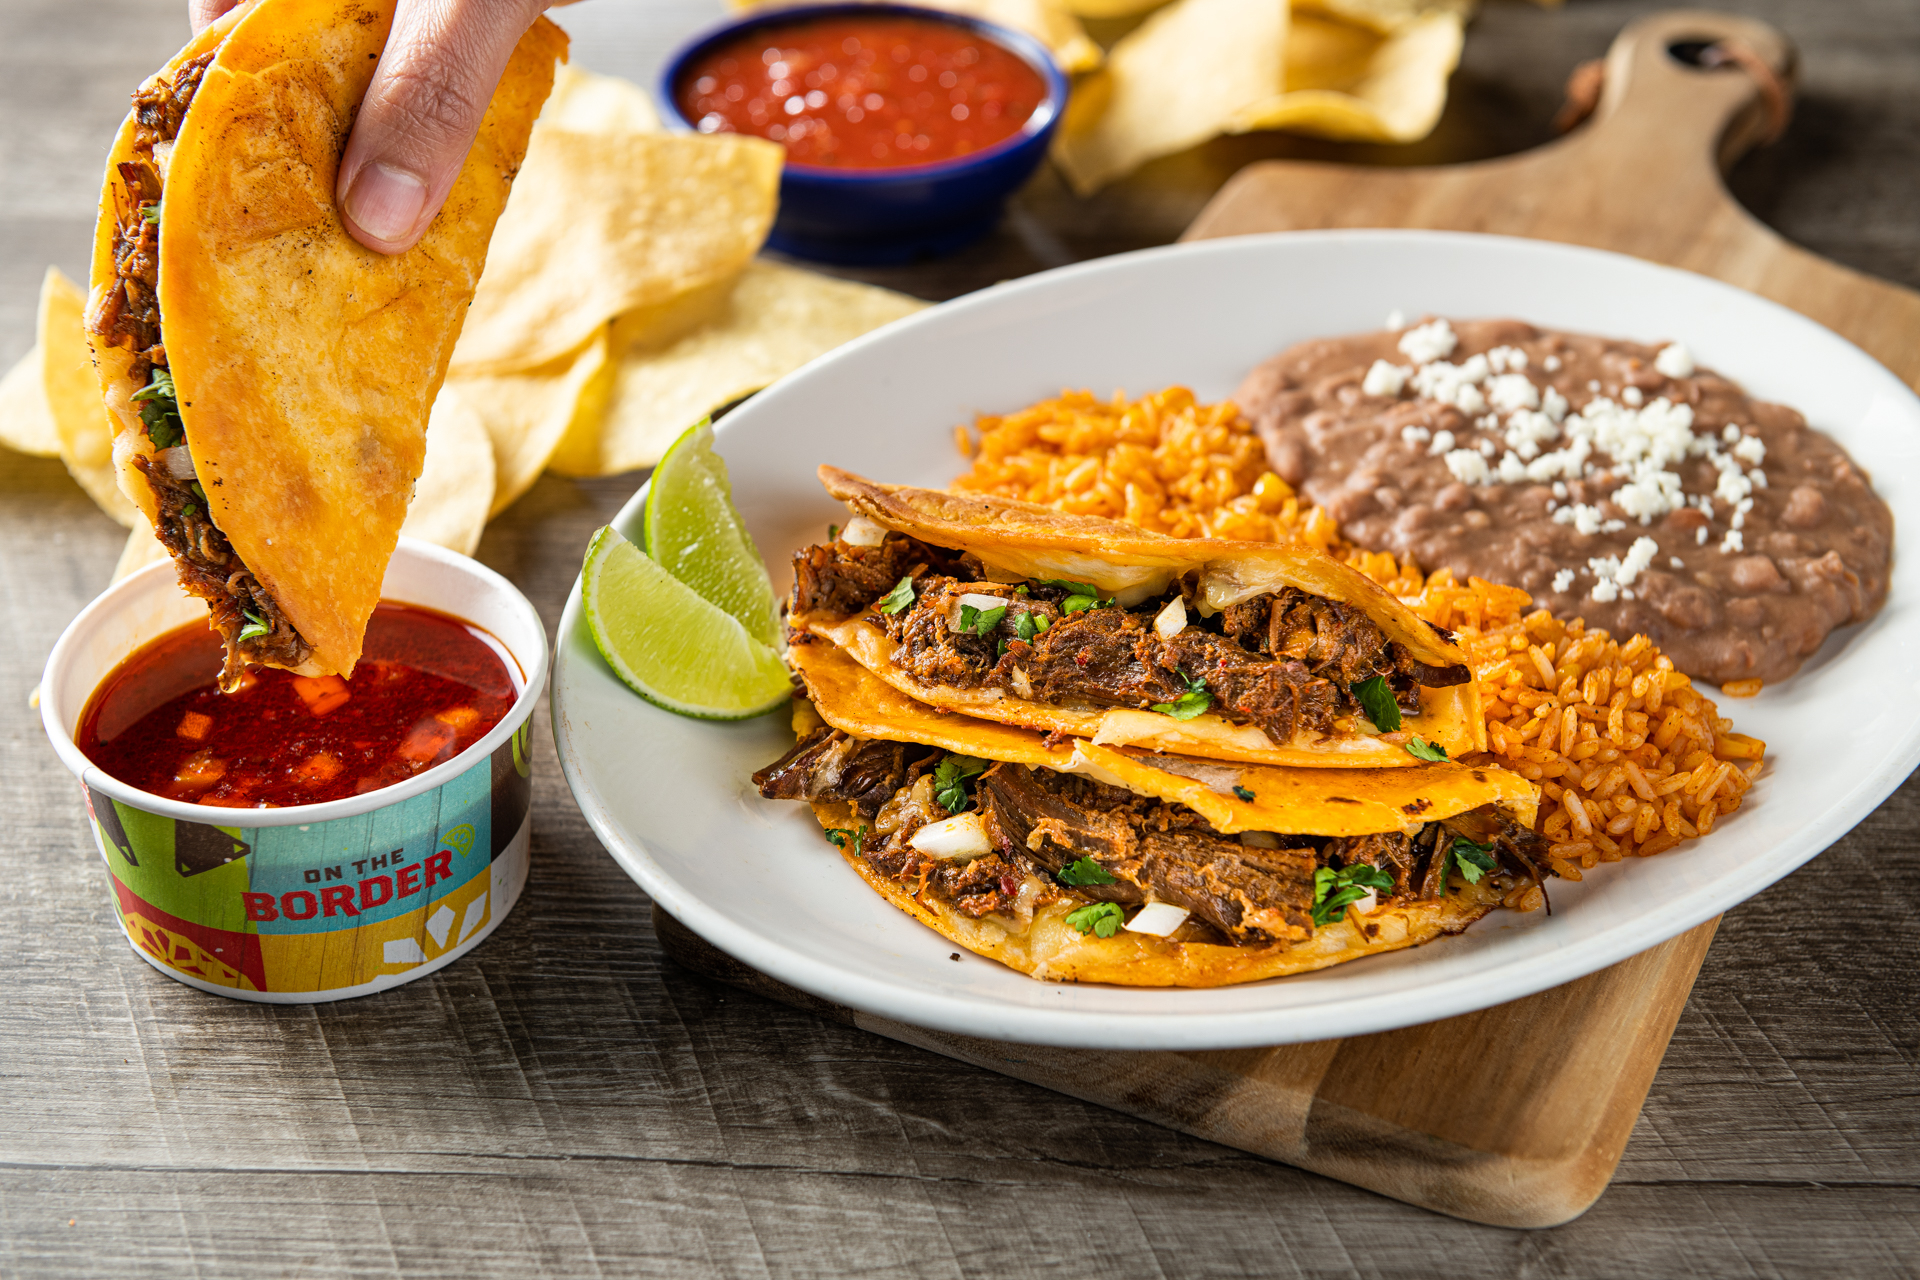 On The Border Introduces New Border-Style Street Food | Business Wire